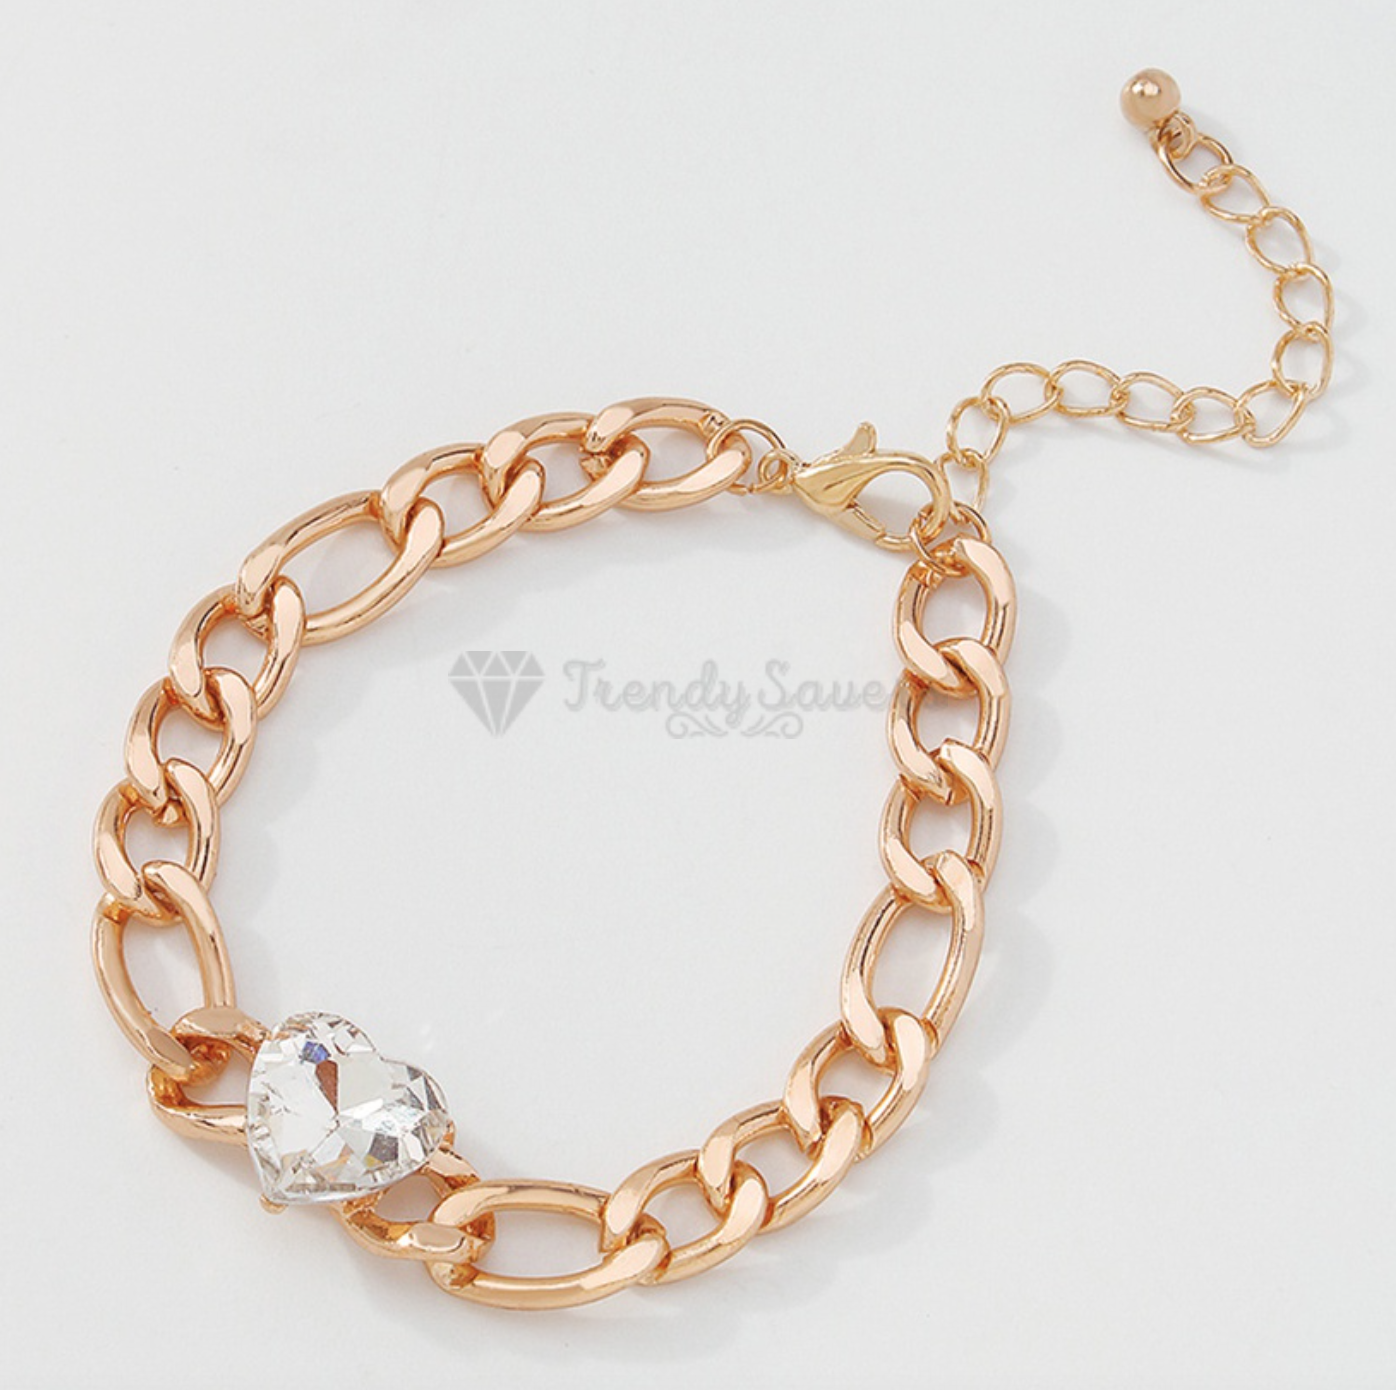 18K Gold Plated Figaro Chain Crystal Heart Charm Bracelet Womens Jewellery Gift